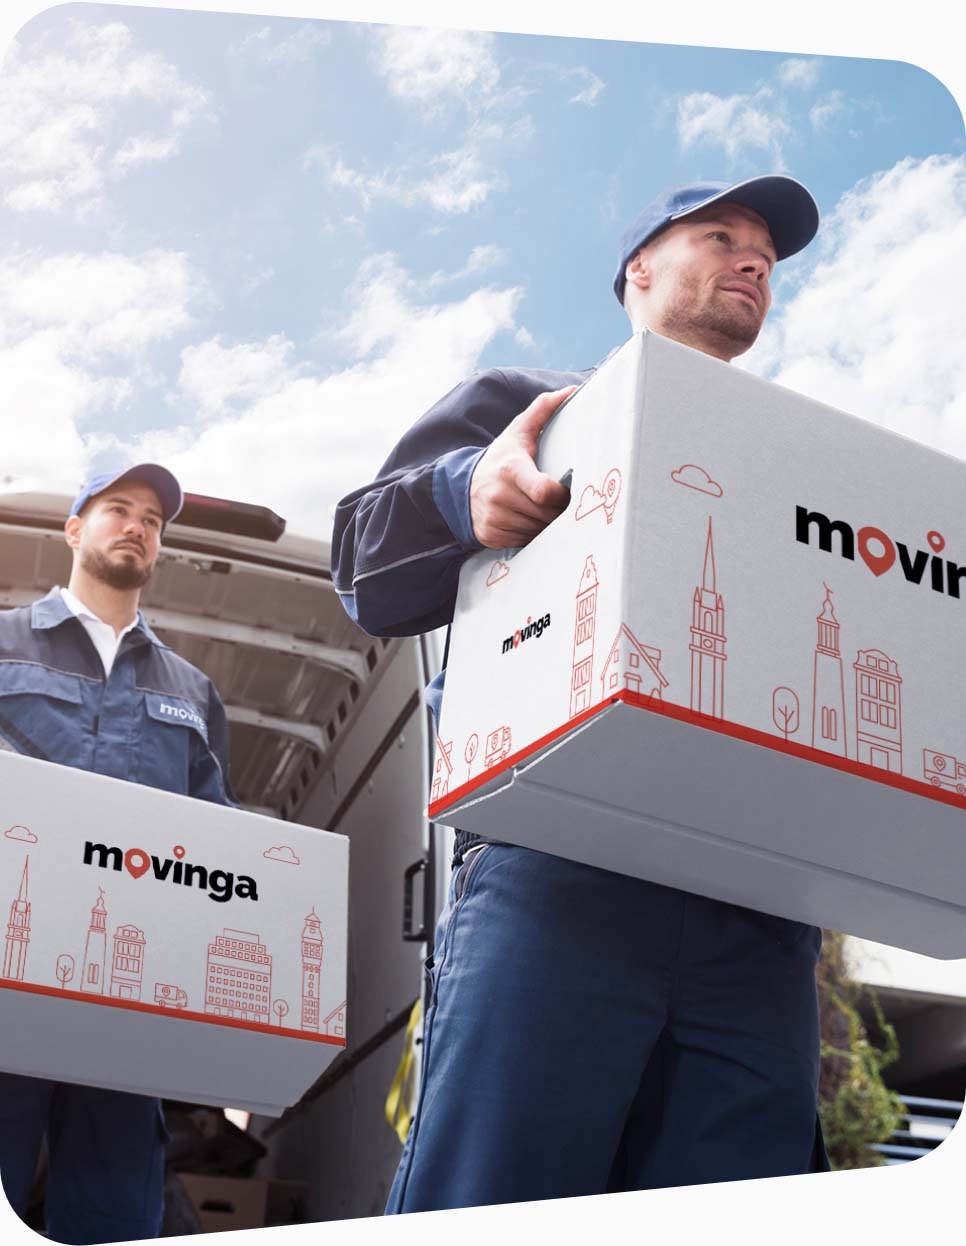 Moving company in Berlin